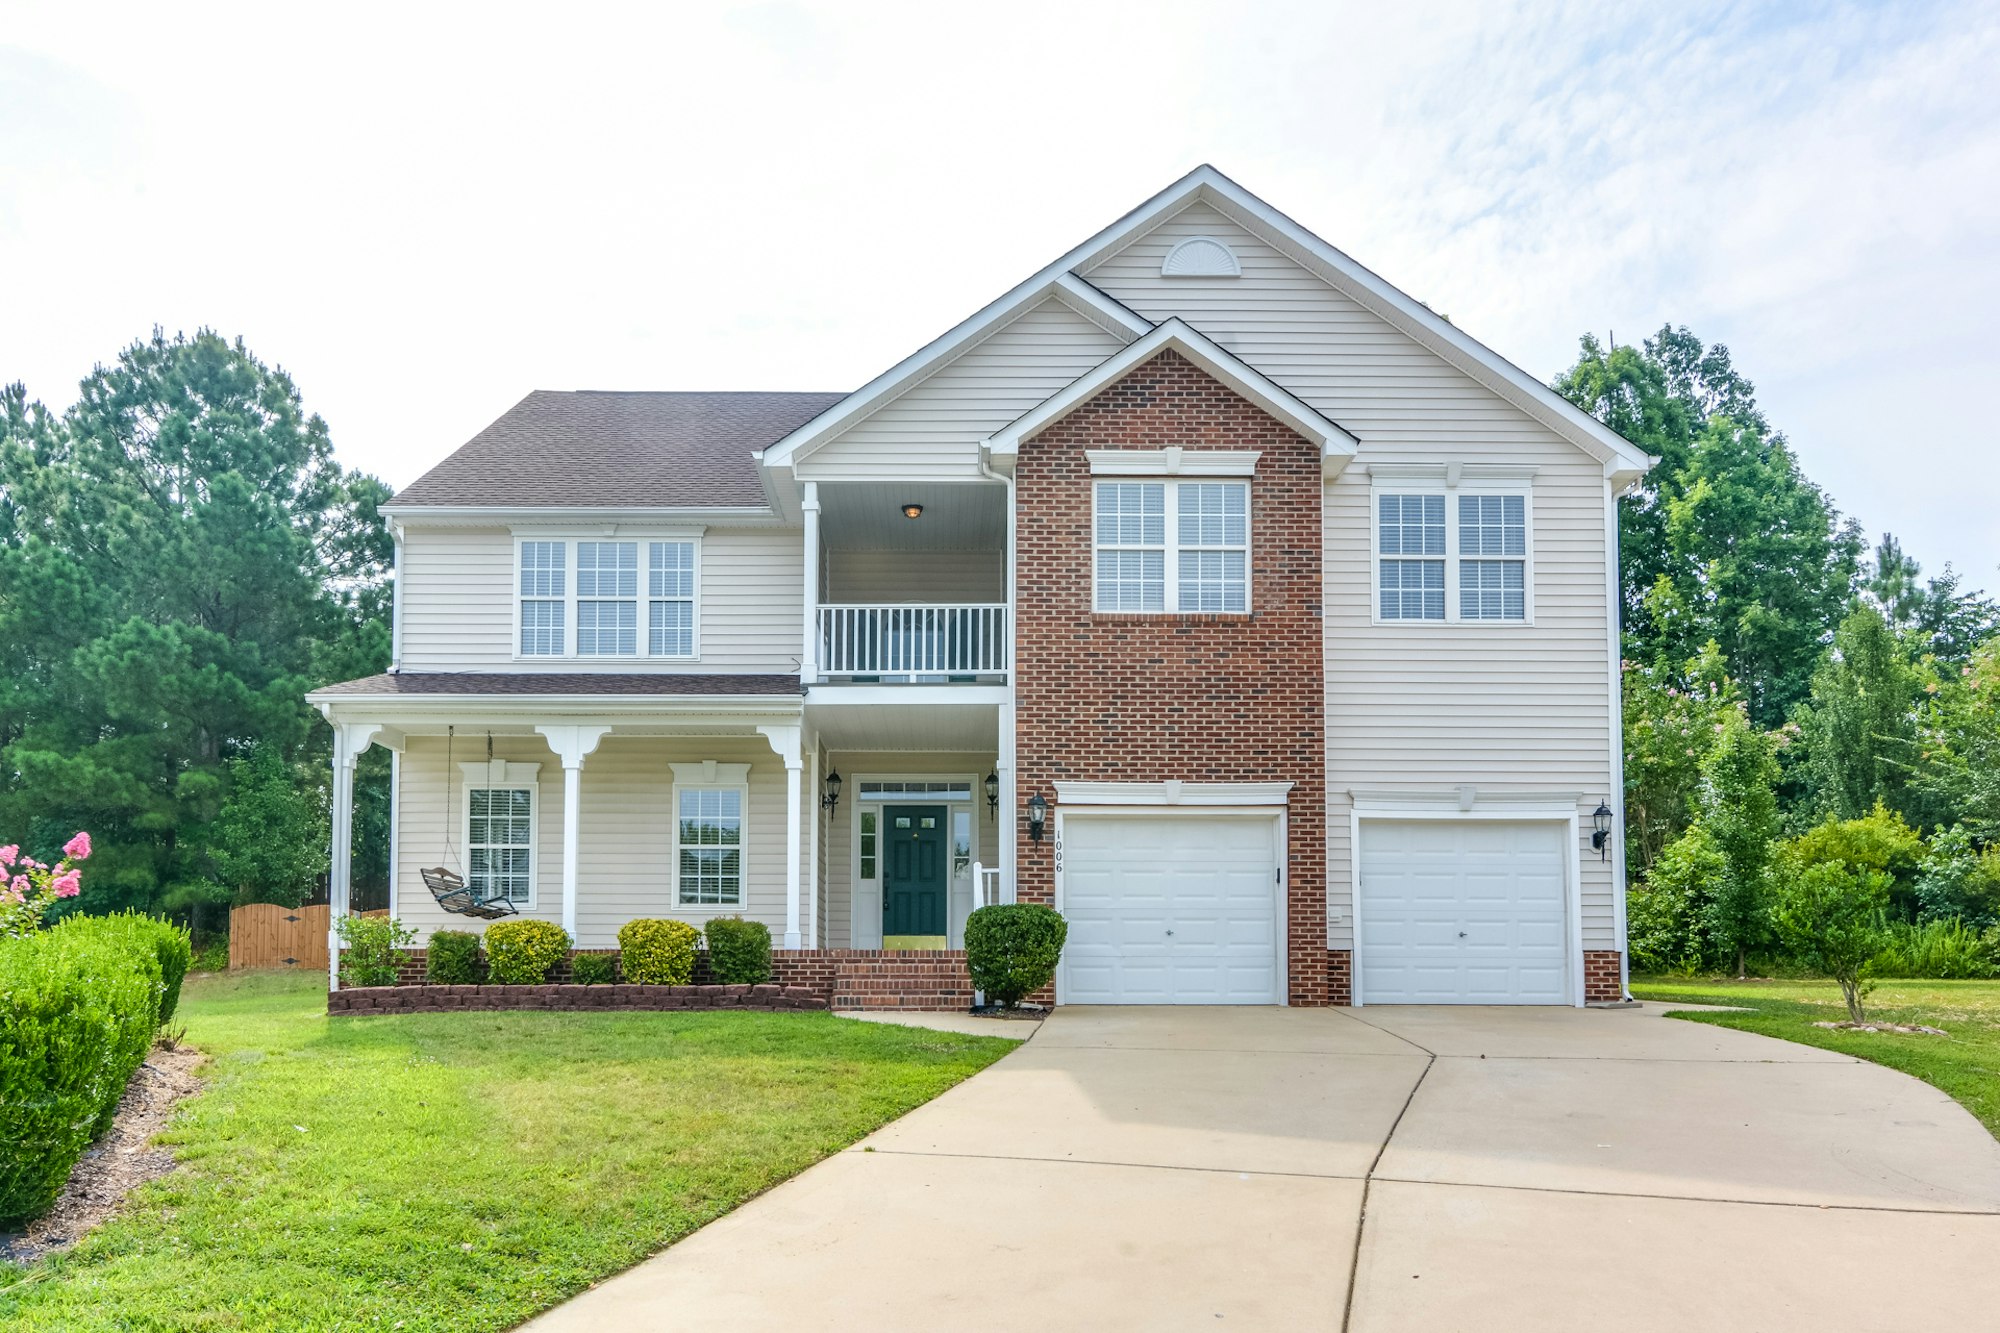 Photo 1 of 21 - 1006 Cantrell Ln, Apex, NC 27502